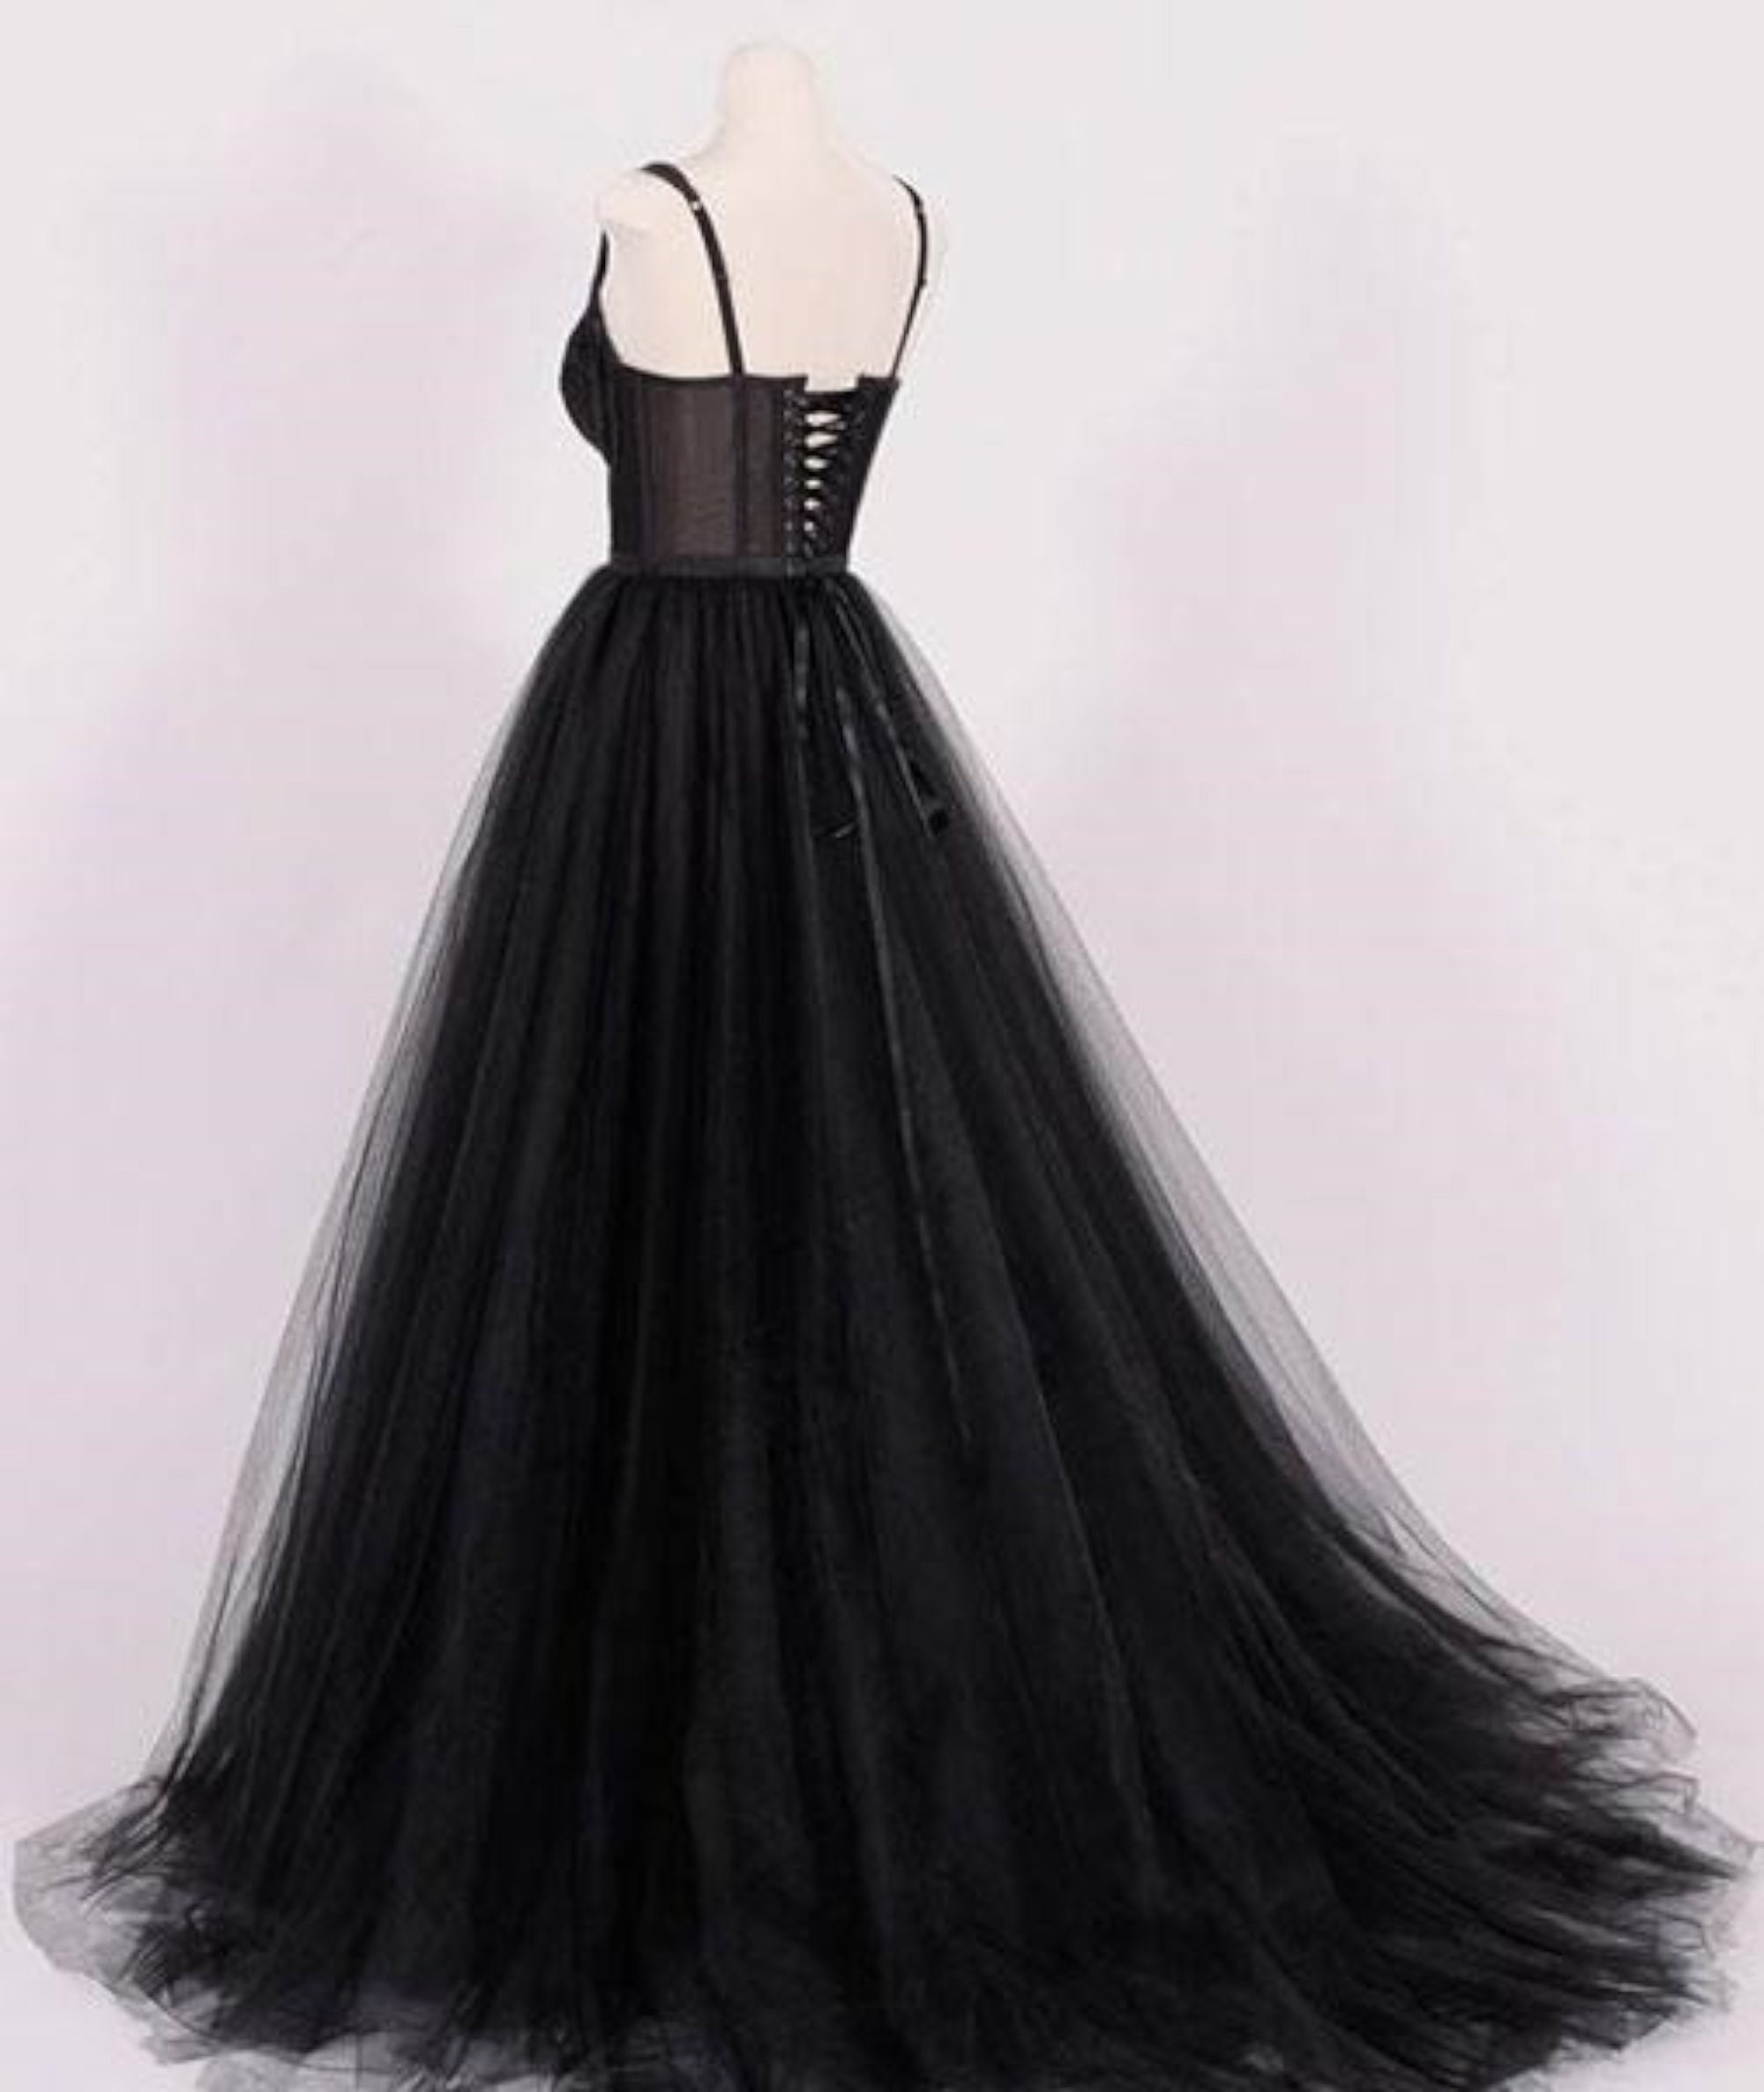 Simple Elegant Black Evening Dress or Goth Wedding Gown With - Etsy UK